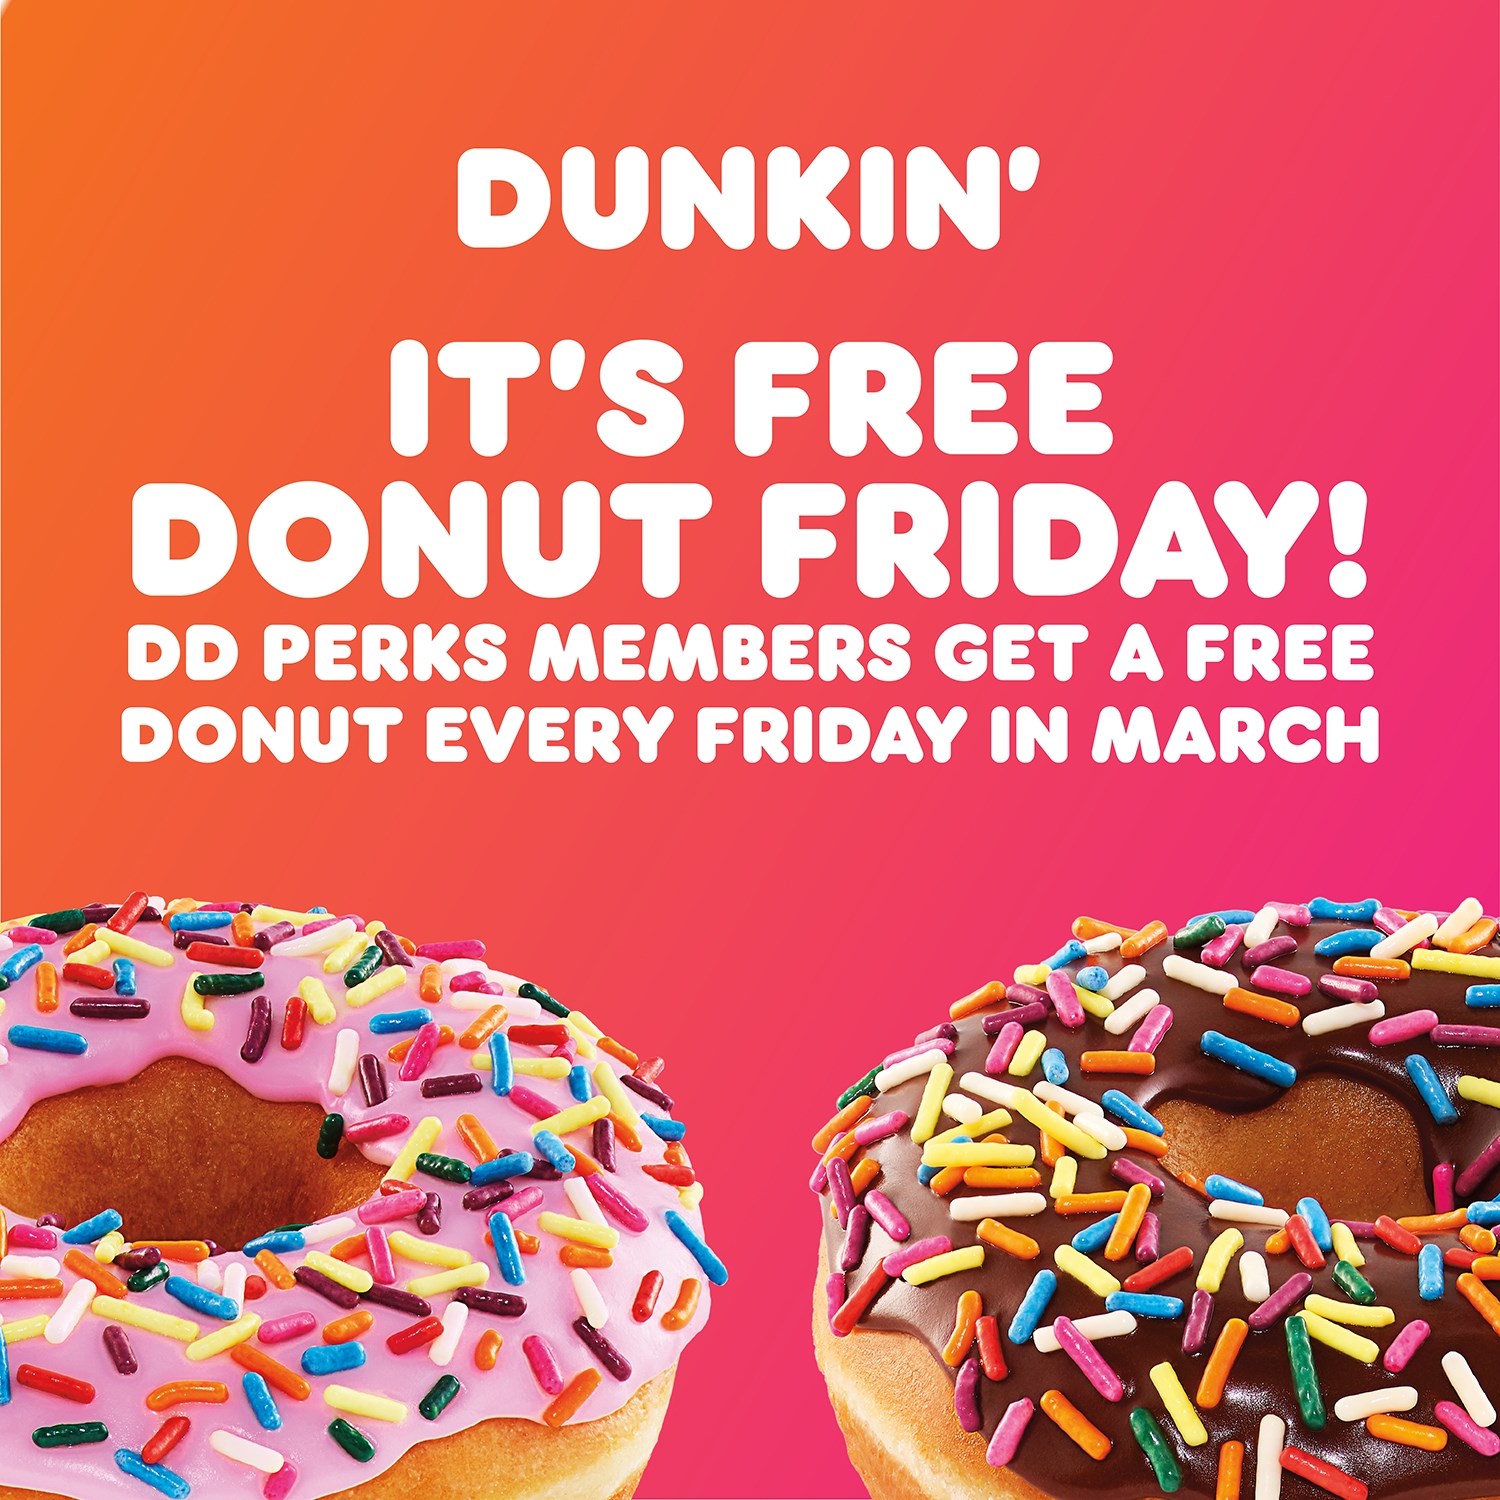 Free donuts at Dunkin' every Friday this month WFXG